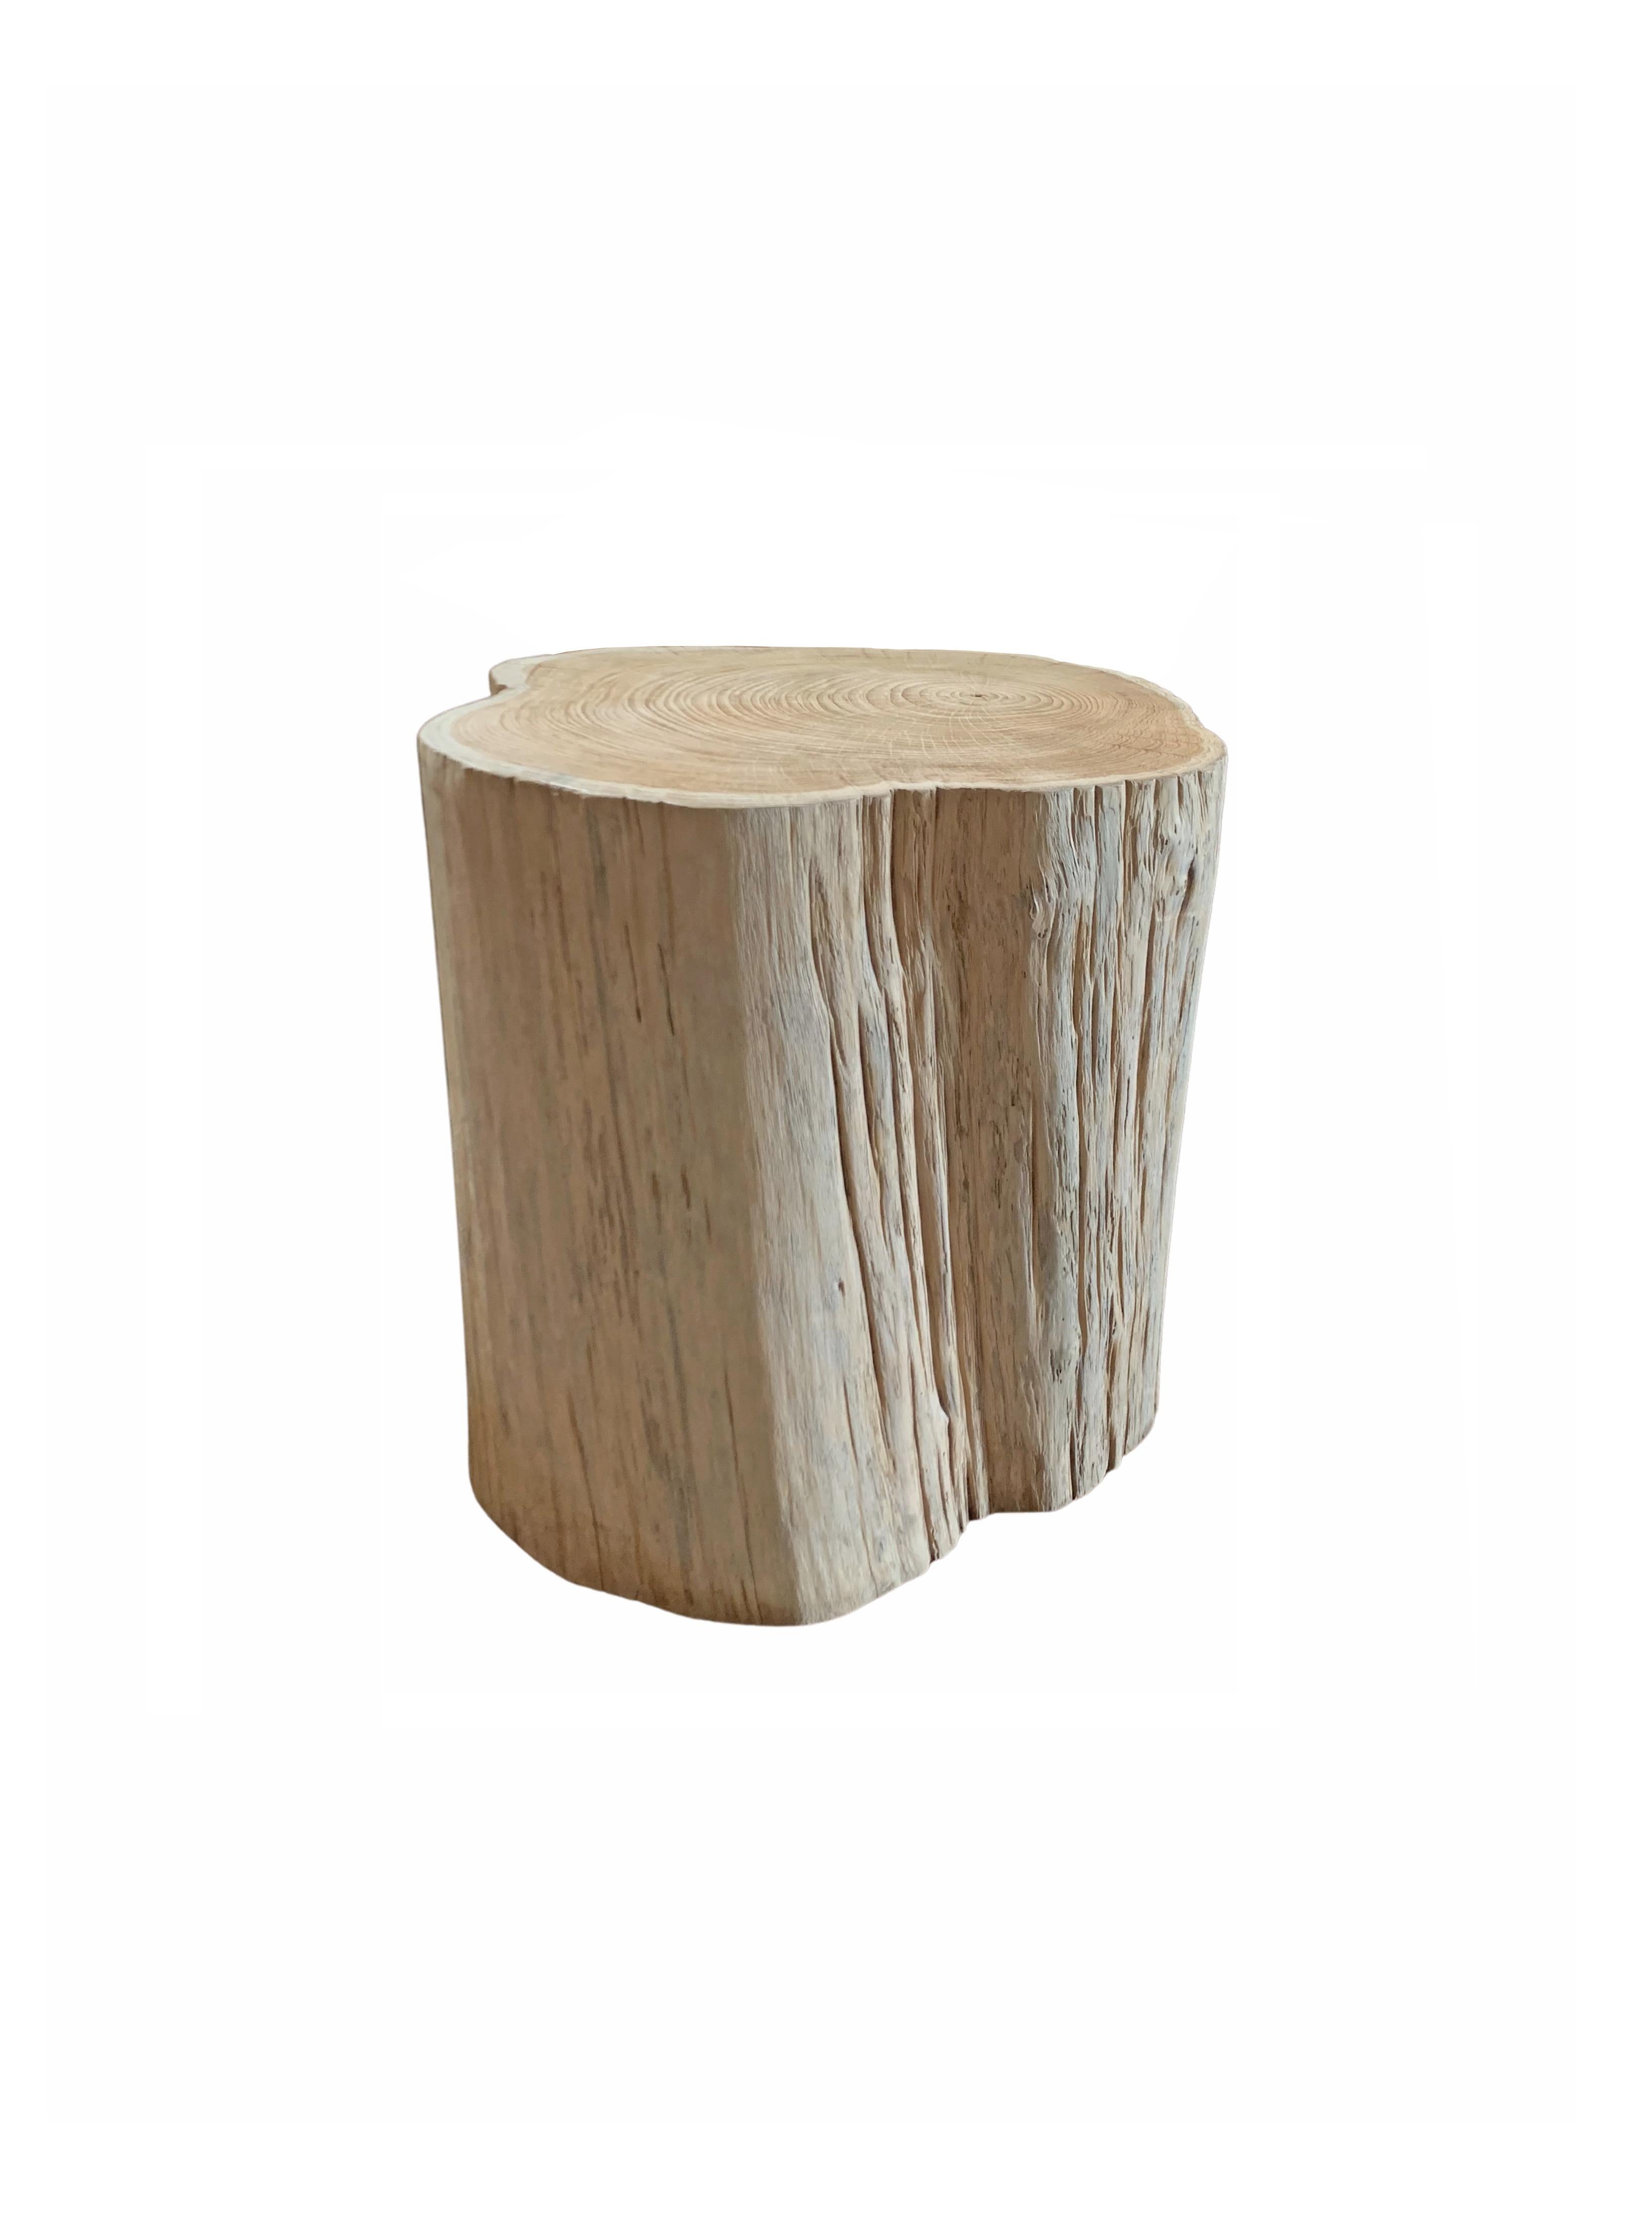 A wonderfully organic round side table. Its neutral pigment and subtle wood texture makes it perfect for any space. This table was crafted from a solid trunk of mango wood. To achieve its pigment the wood underwent a bleaching process and was then